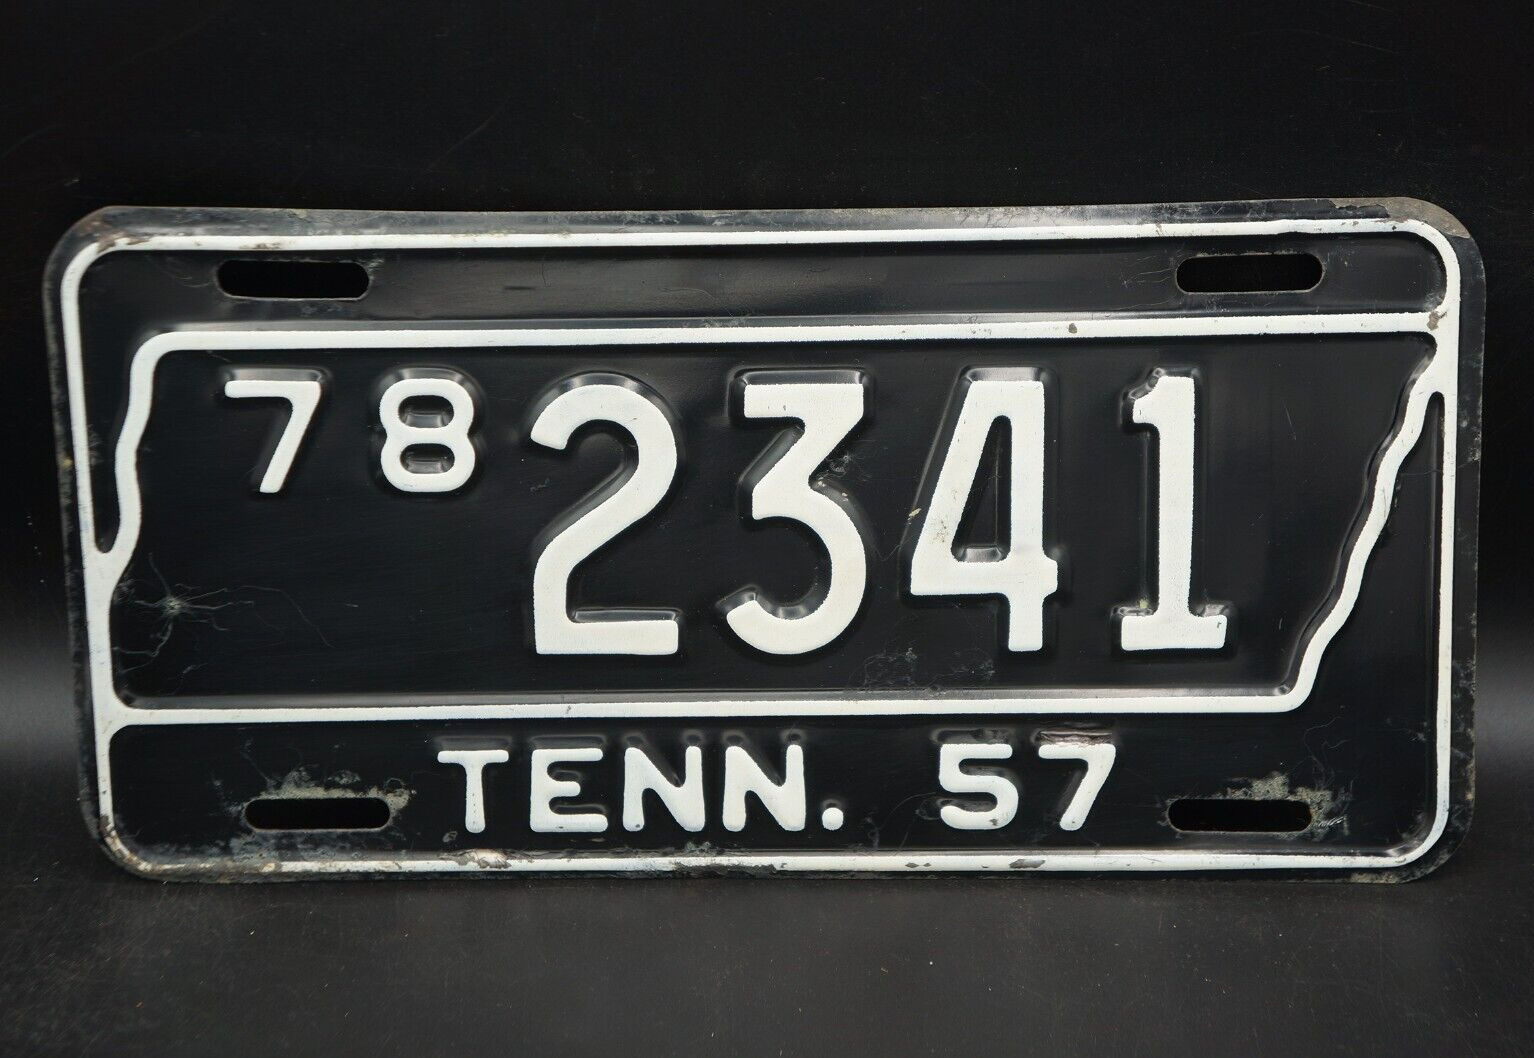 1957 TENNESSEE License Plate # 78 - 2341